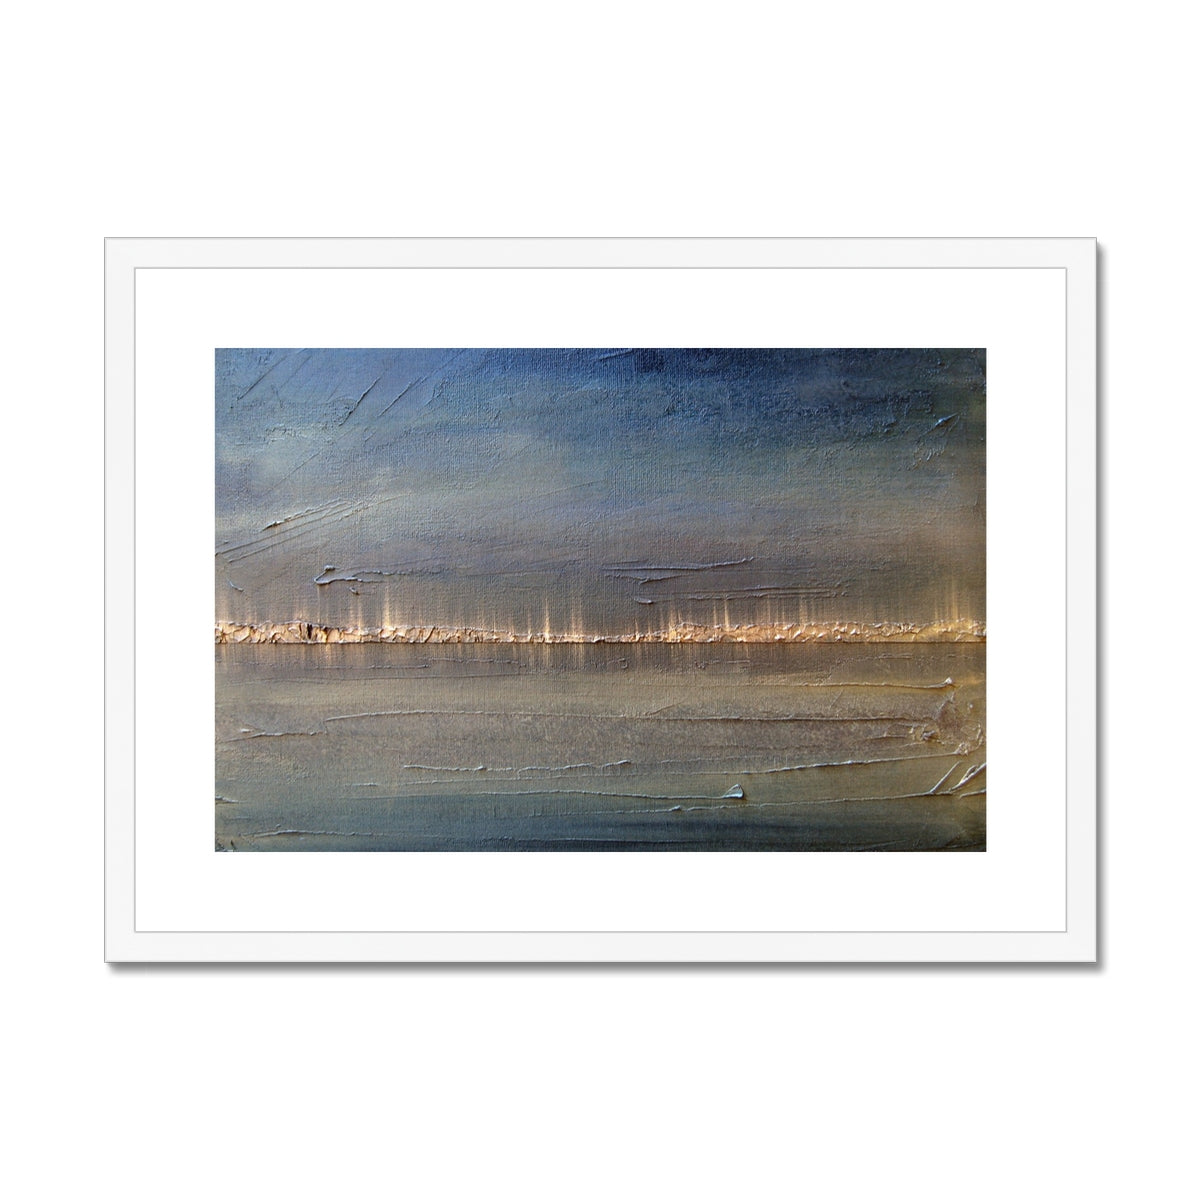 Distant Lights Lake Ontario Painting | Framed & Mounted Prints From Scotland-Framed & Mounted Prints-World Art Gallery-A2 Landscape-White Frame-Paintings, Prints, Homeware, Art Gifts From Scotland By Scottish Artist Kevin Hunter